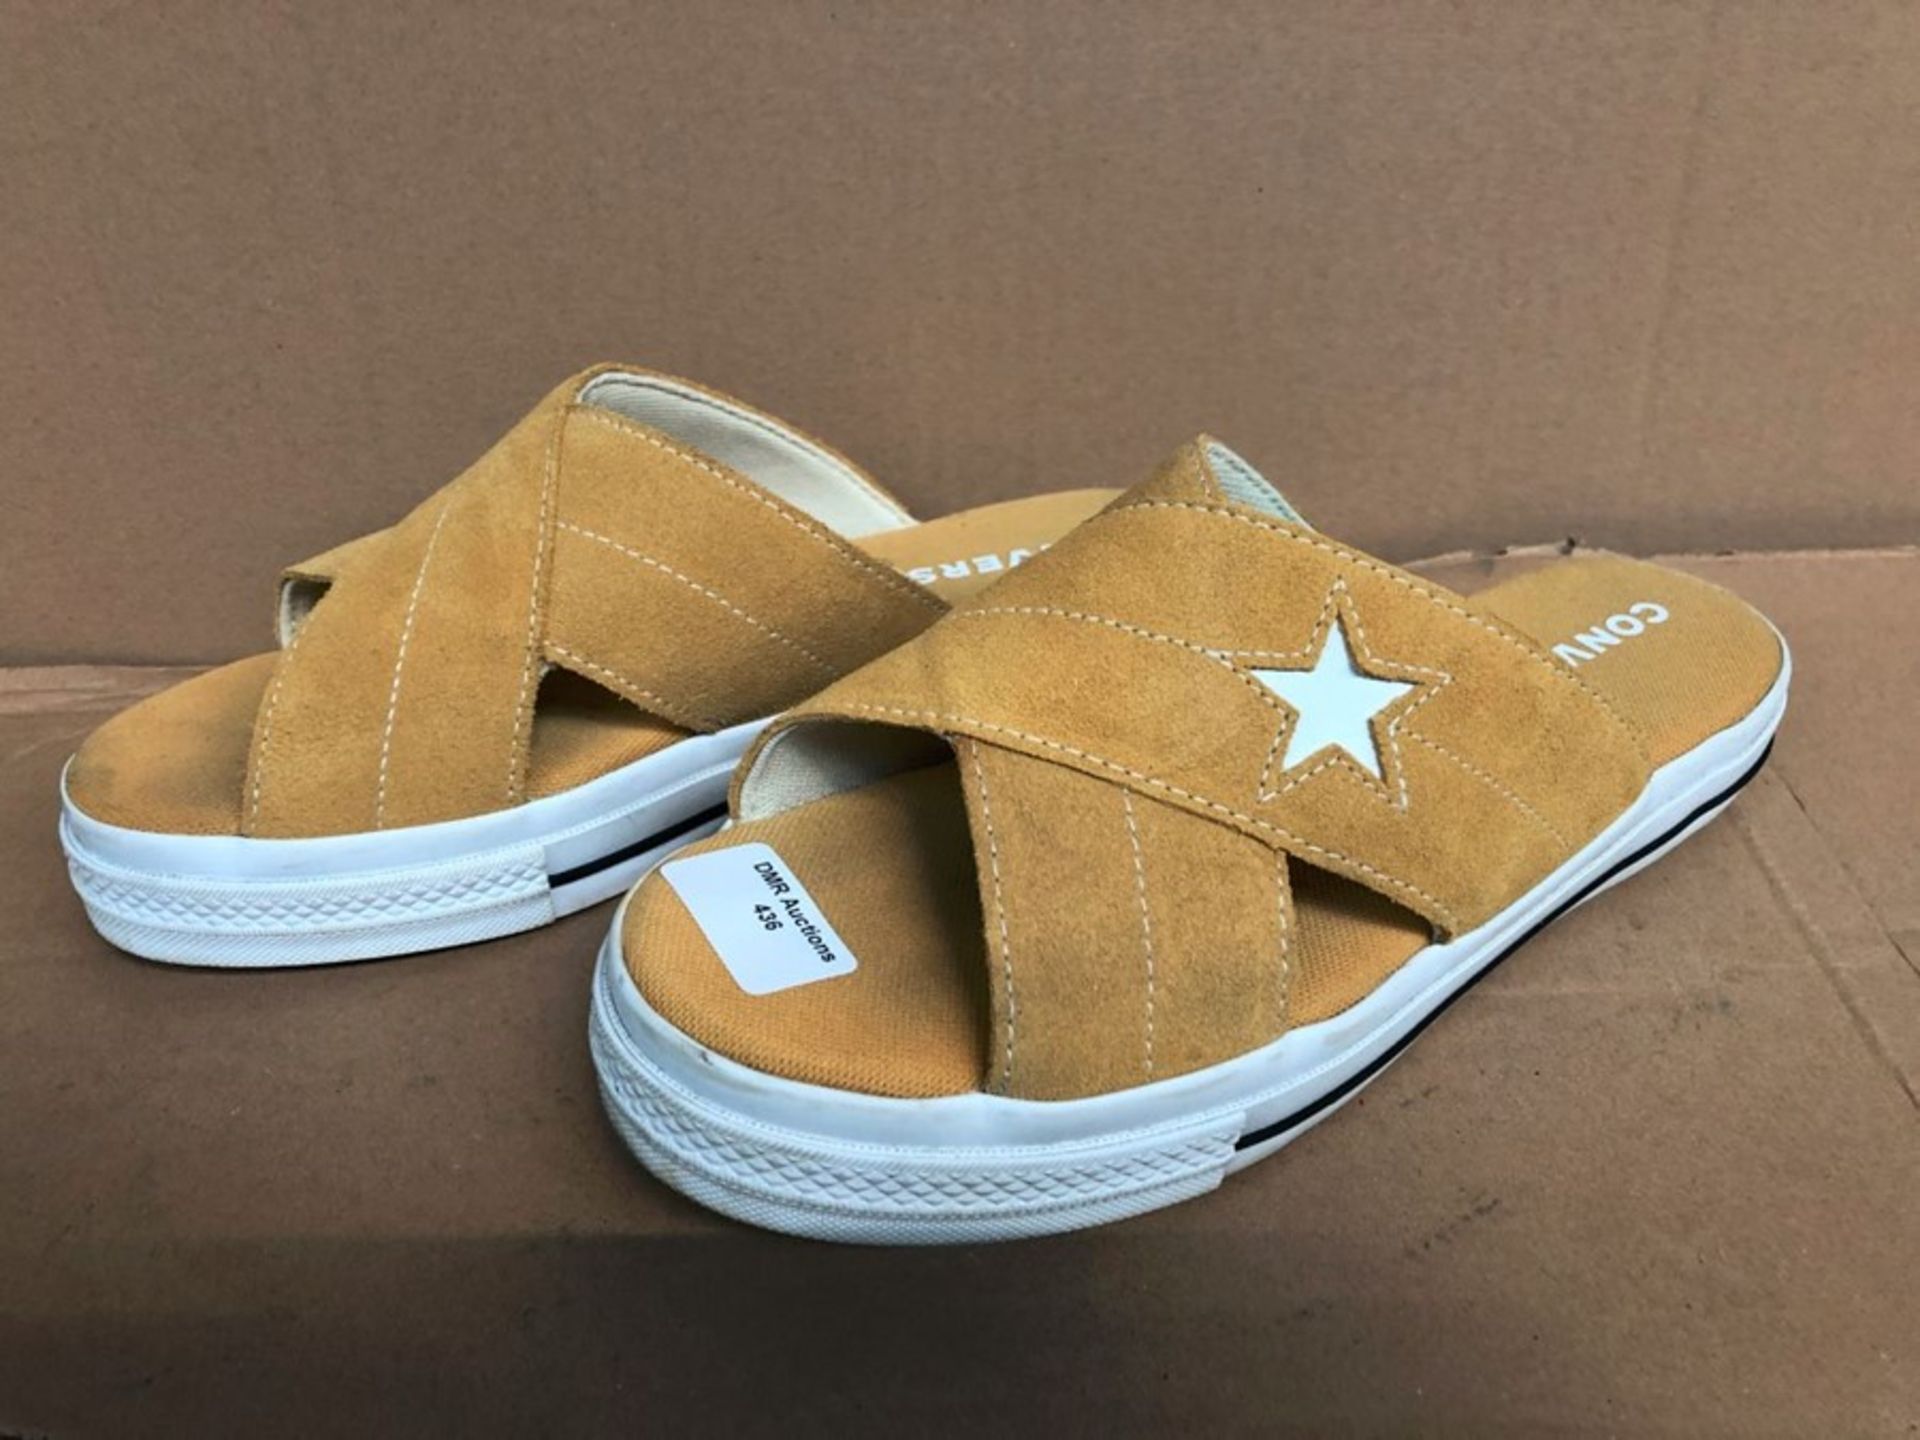 1 PAIR OF ONE STAR SEASONAL COLOUR SANDALS IN YELLOW WITH FLATFORM HEEL / UK SIZE: 7 / RRP £30.00